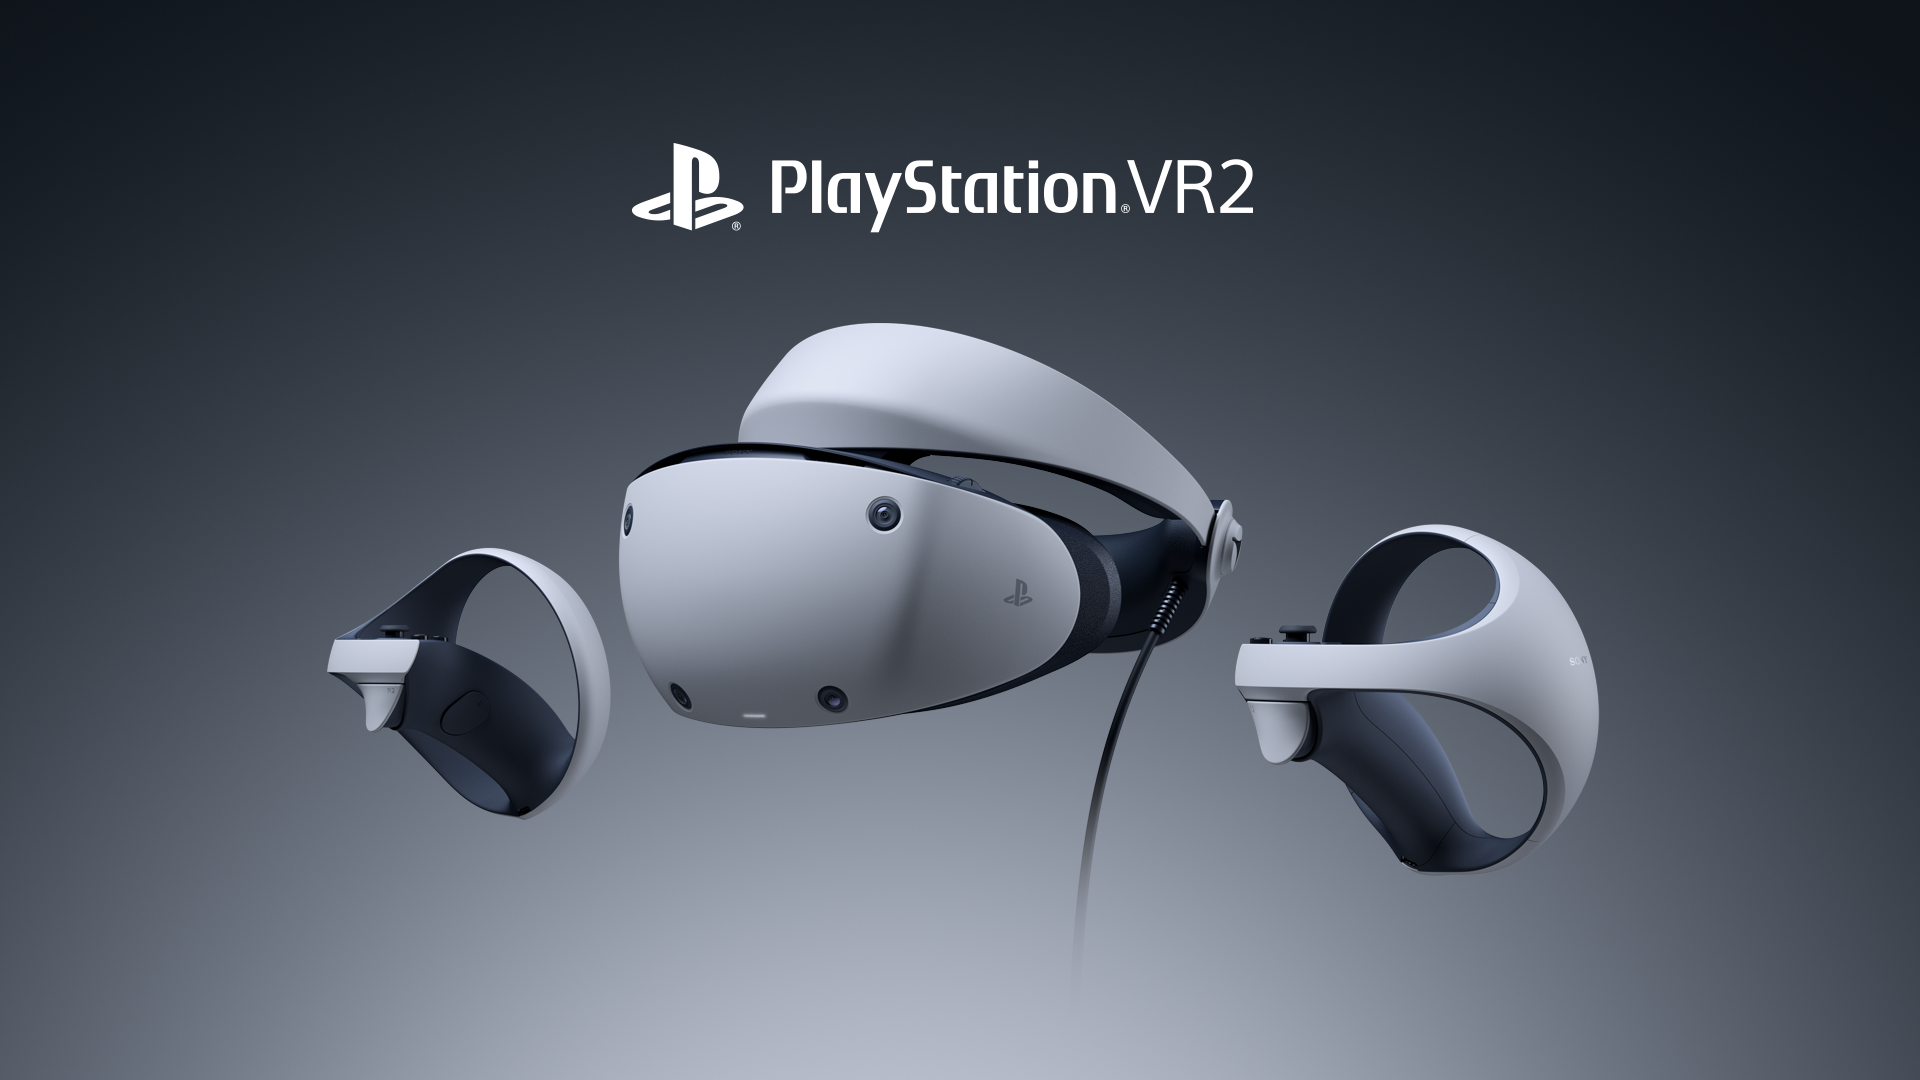 PlayStation VR2 - Our Hands-on Impressions of PS VR2 